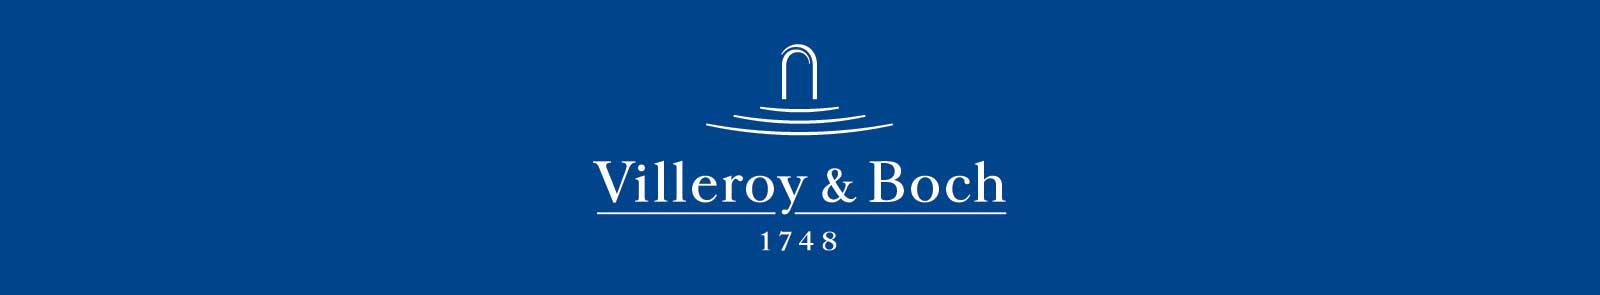 Villeroy&Boch once again rewards SACMI Gaiotto performance and reliability